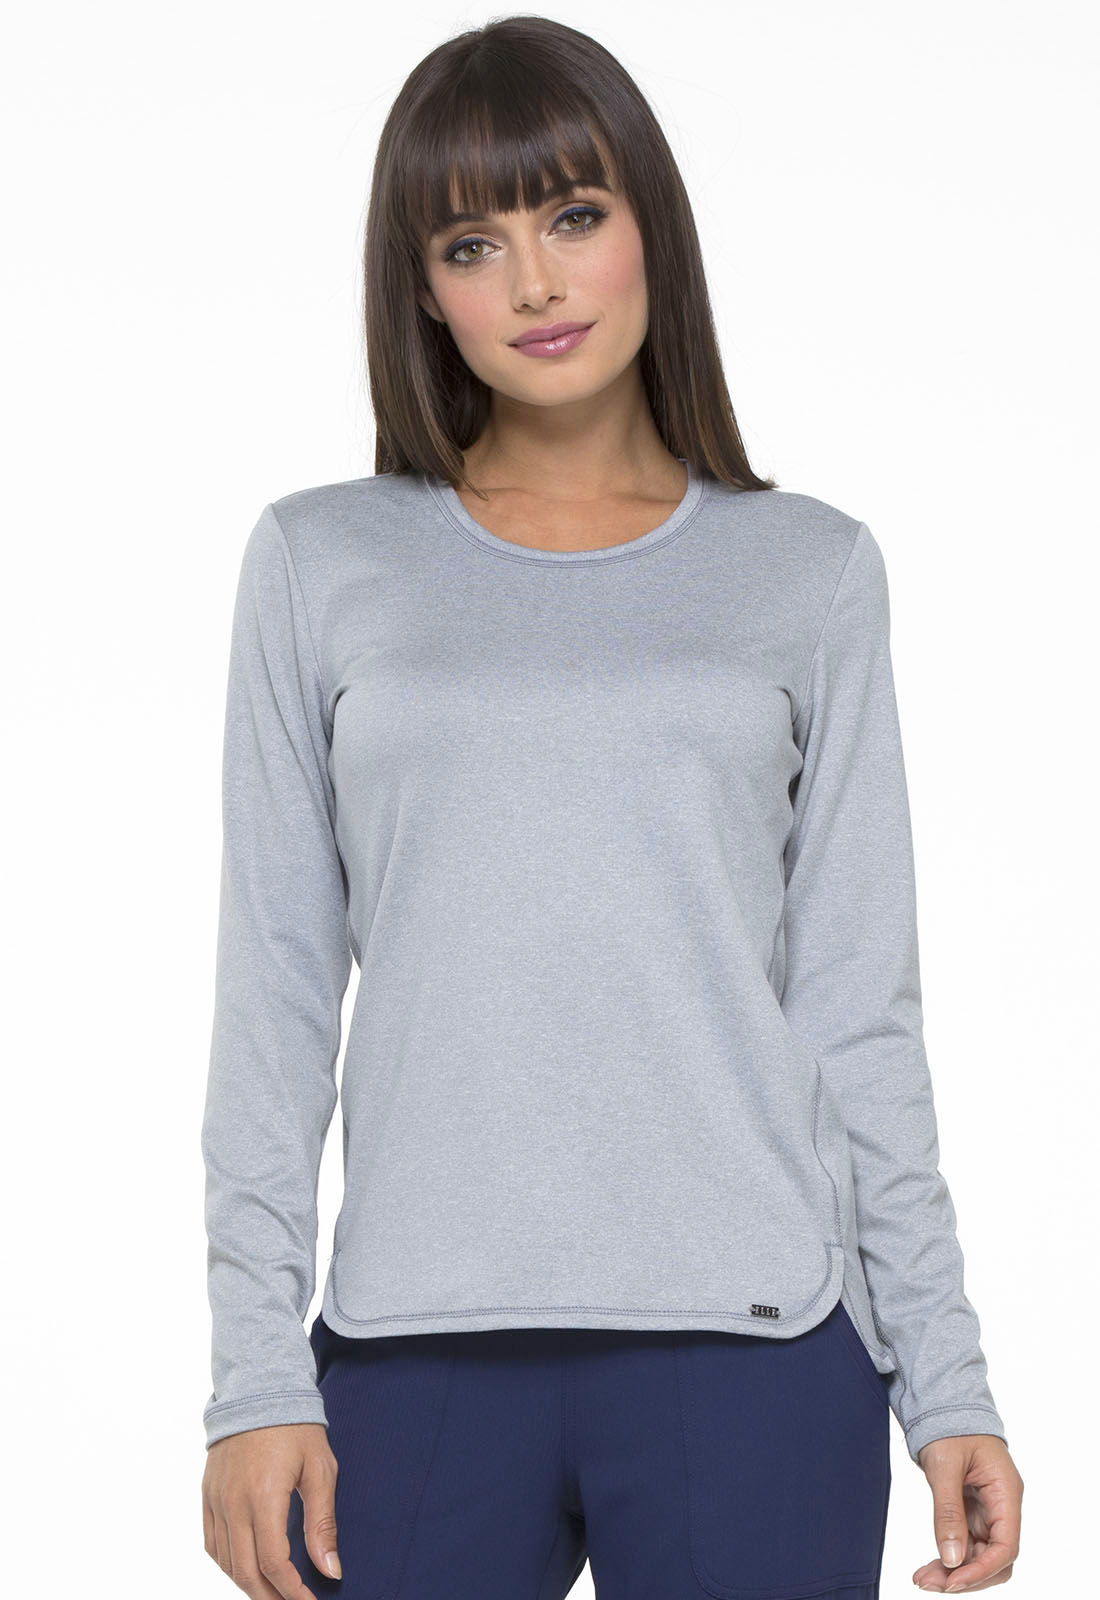 Simply Polished Underscrubs Knit Tee in Grey EL915-GRY from Cherokee ...